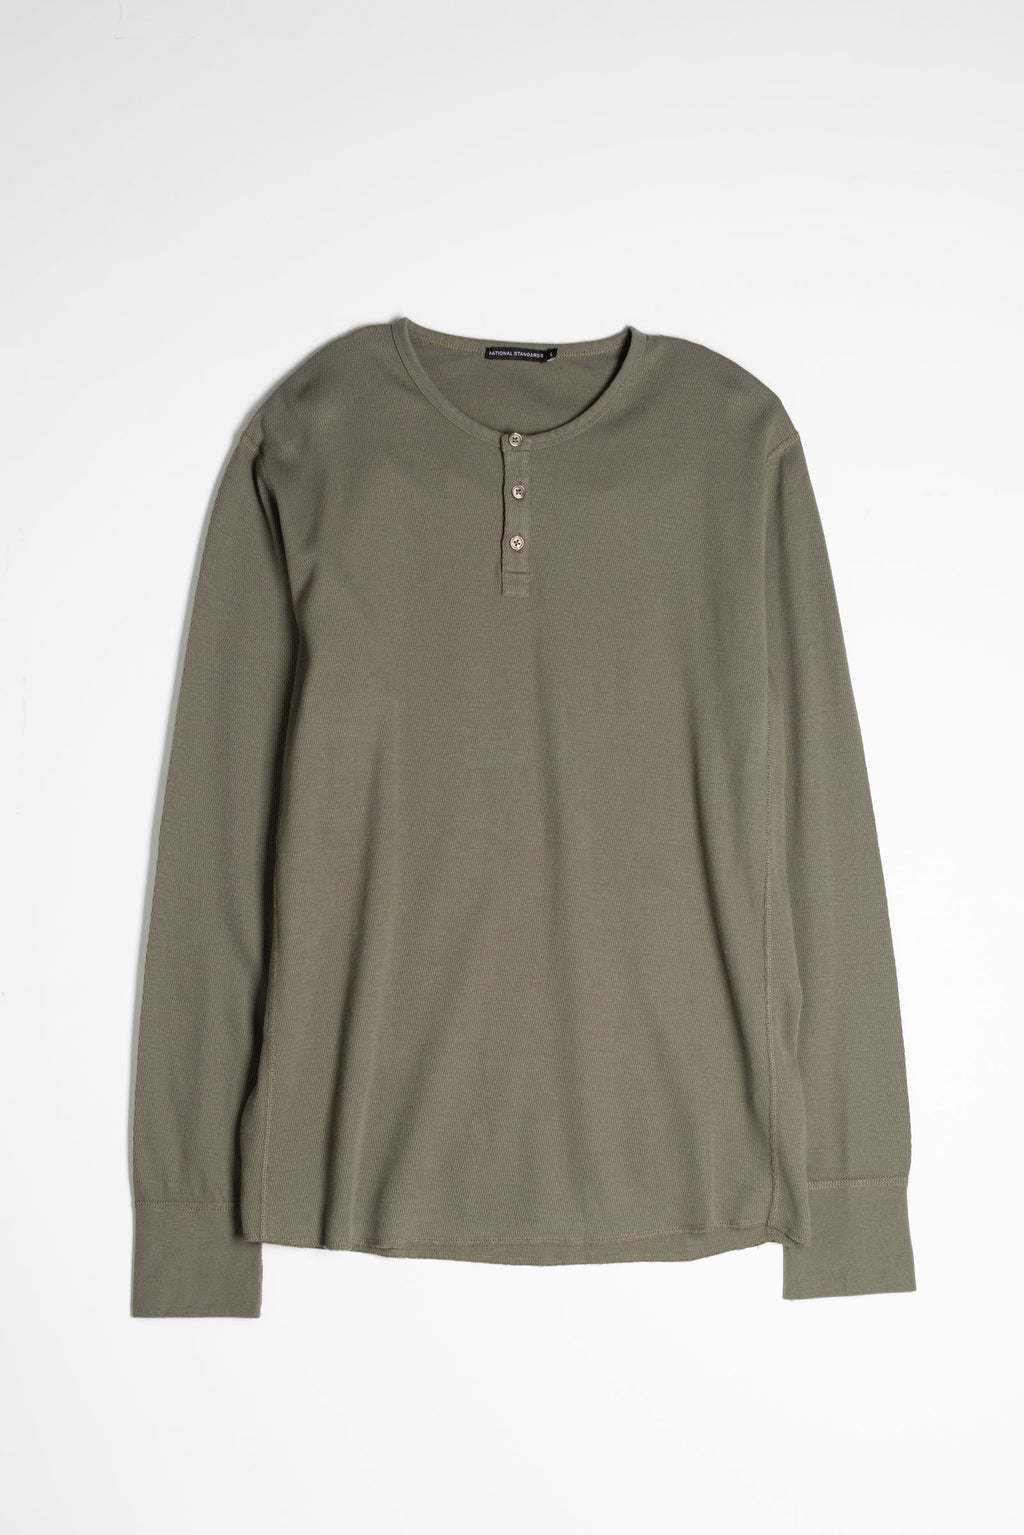 NS2154-7 Mesh Thermal Long Sleeve Henley in Army Green – National